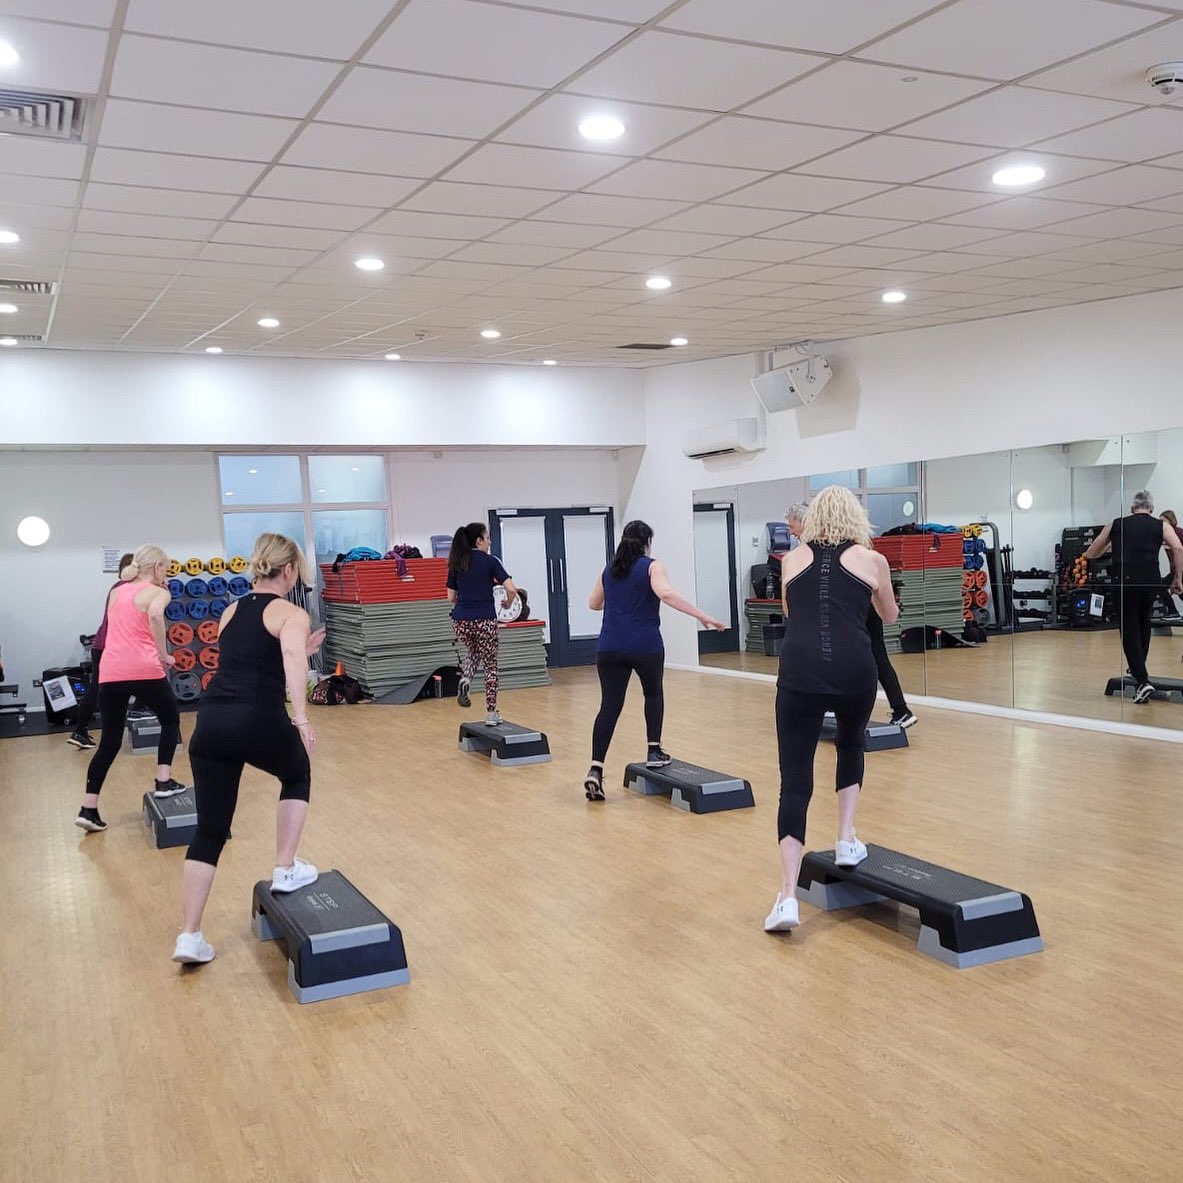 🚨 NEW class 🚨

Step & Tone with Neil on Mondays at 12:30 - 13:30 at Danielle Brown Sports Centre 💪 

Book online or call DBSC on: 0116 252 3118

#universityofleicester #gym #gymclass